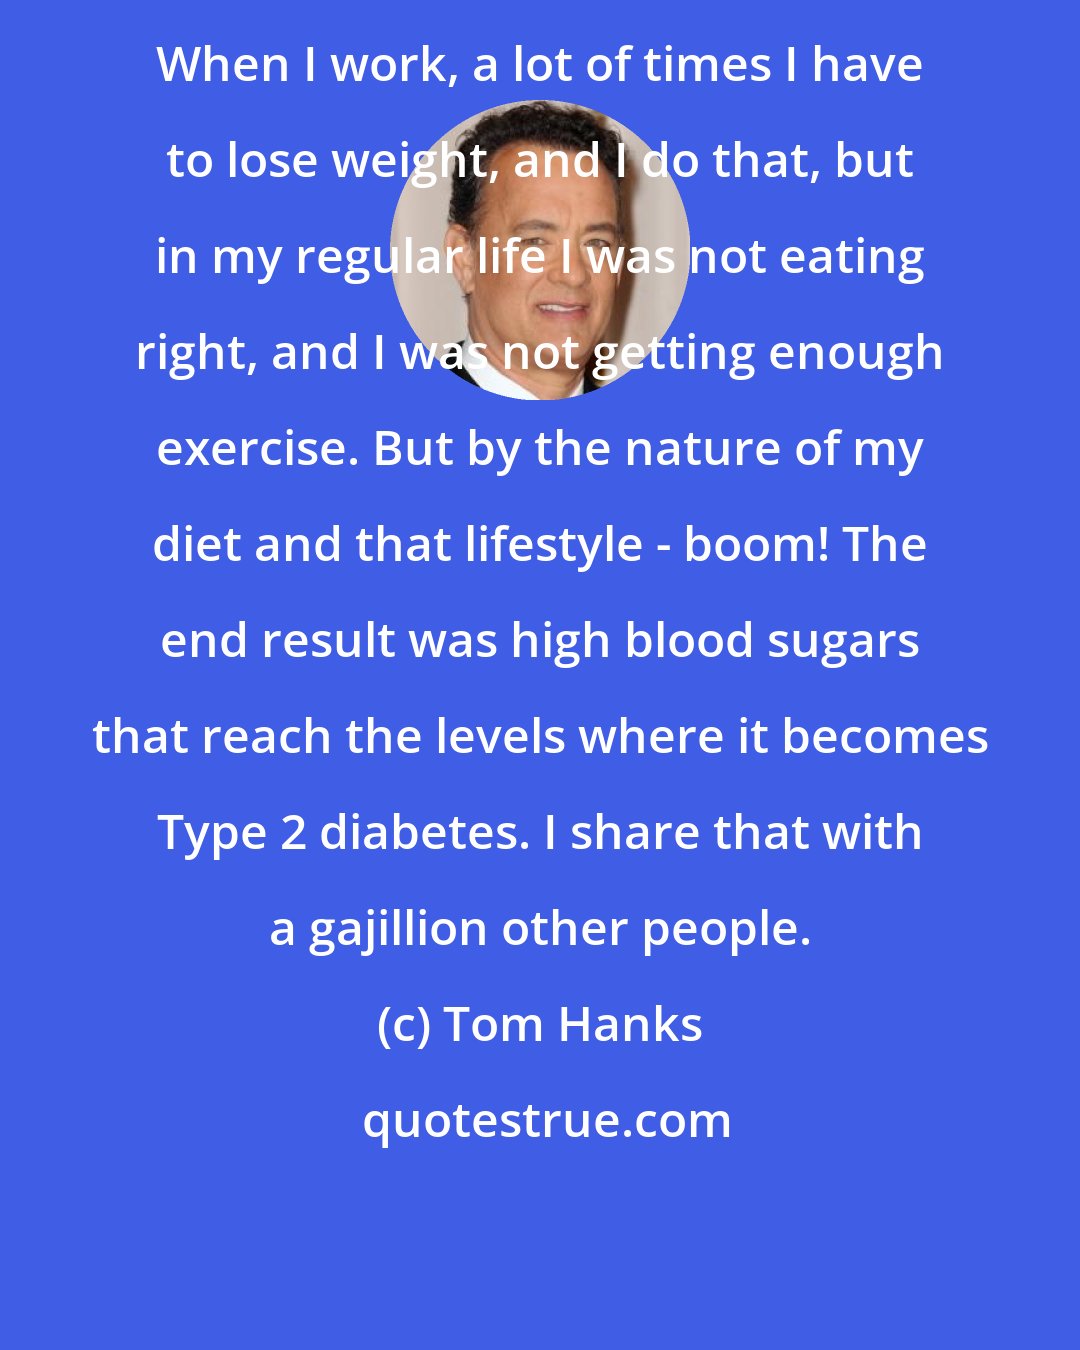 Tom Hanks: When I work, a lot of times I have to lose weight, and I do that, but in my regular life I was not eating right, and I was not getting enough exercise. But by the nature of my diet and that lifestyle - boom! The end result was high blood sugars that reach the levels where it becomes Type 2 diabetes. I share that with a gajillion other people.